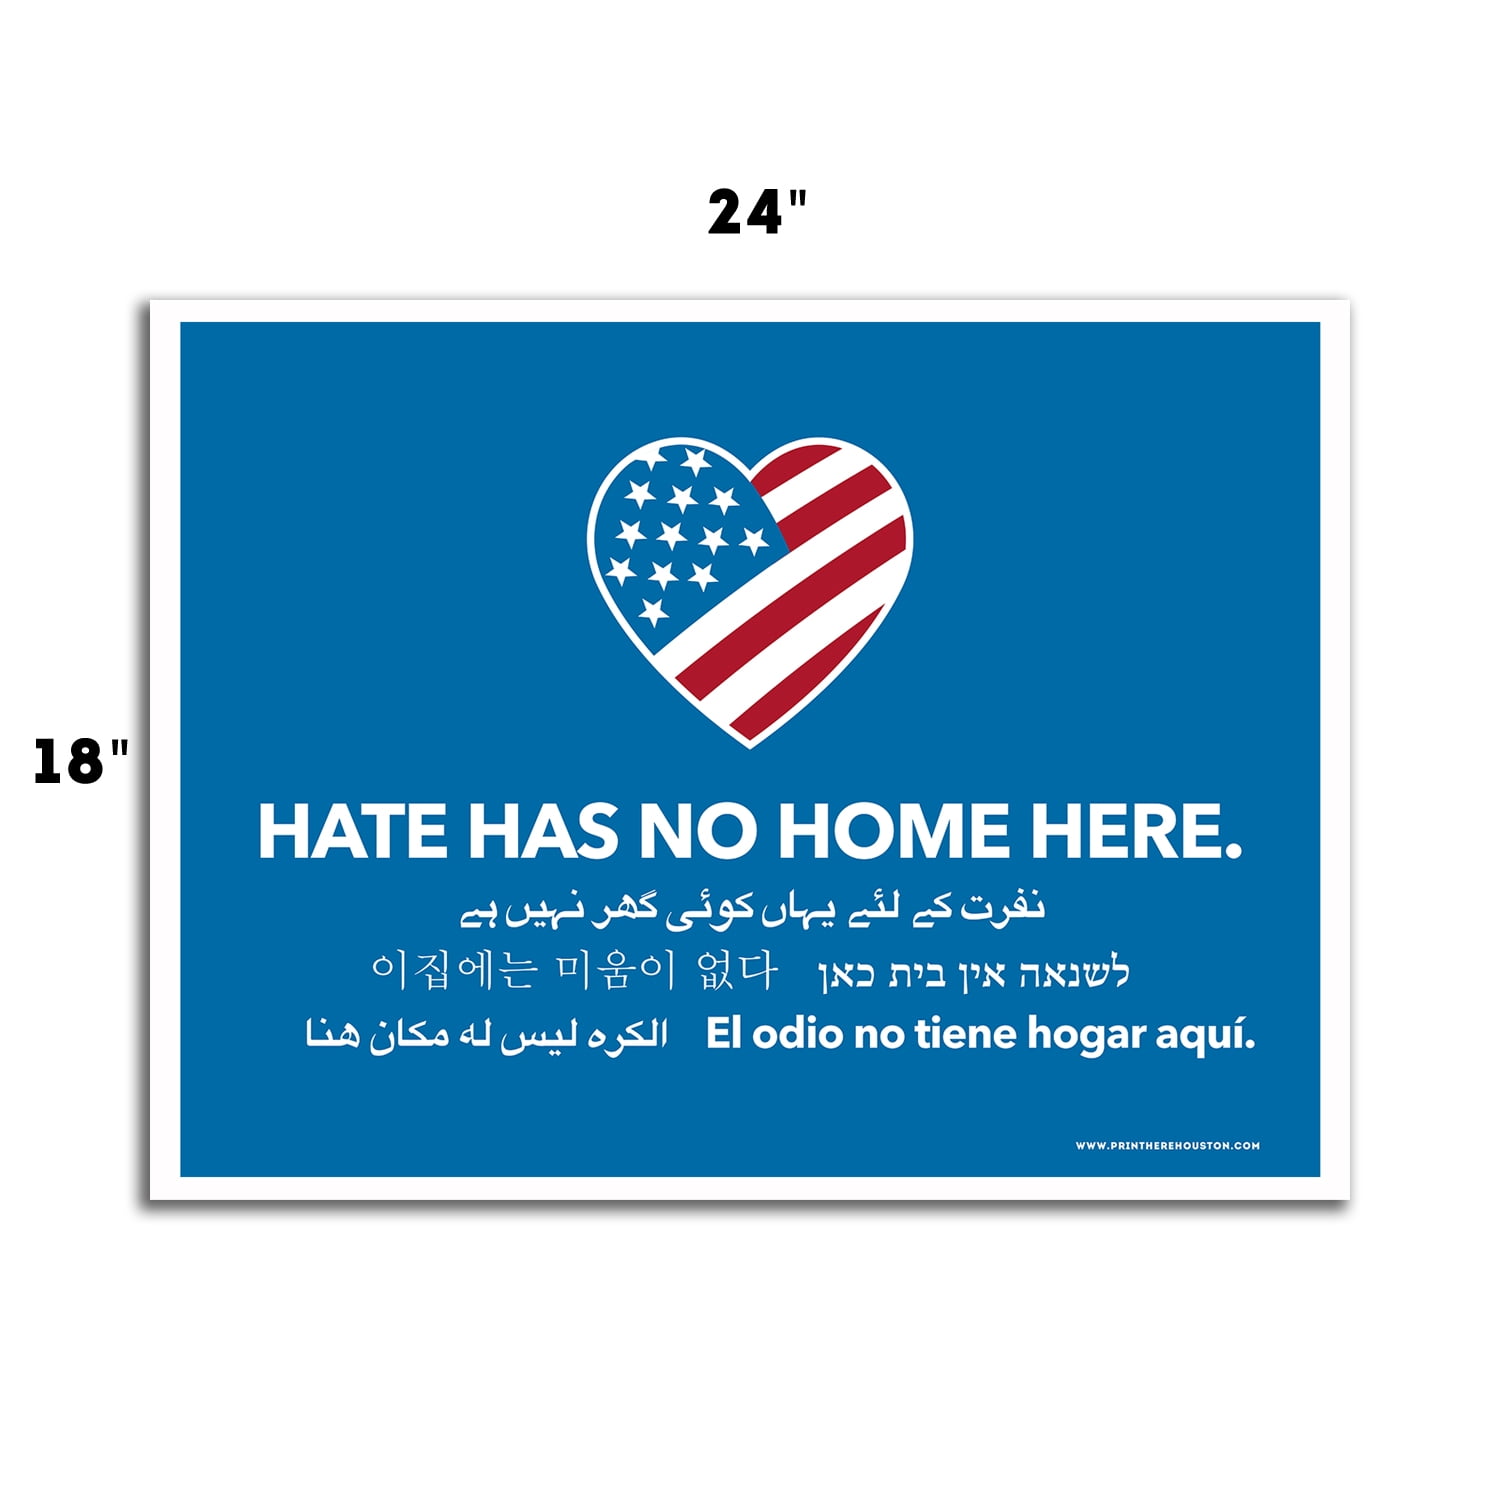 Black lives matter Yard Sign Hate Has No Home Here Sign LGBT Sign Double-sided Print 18x24in We Stand together